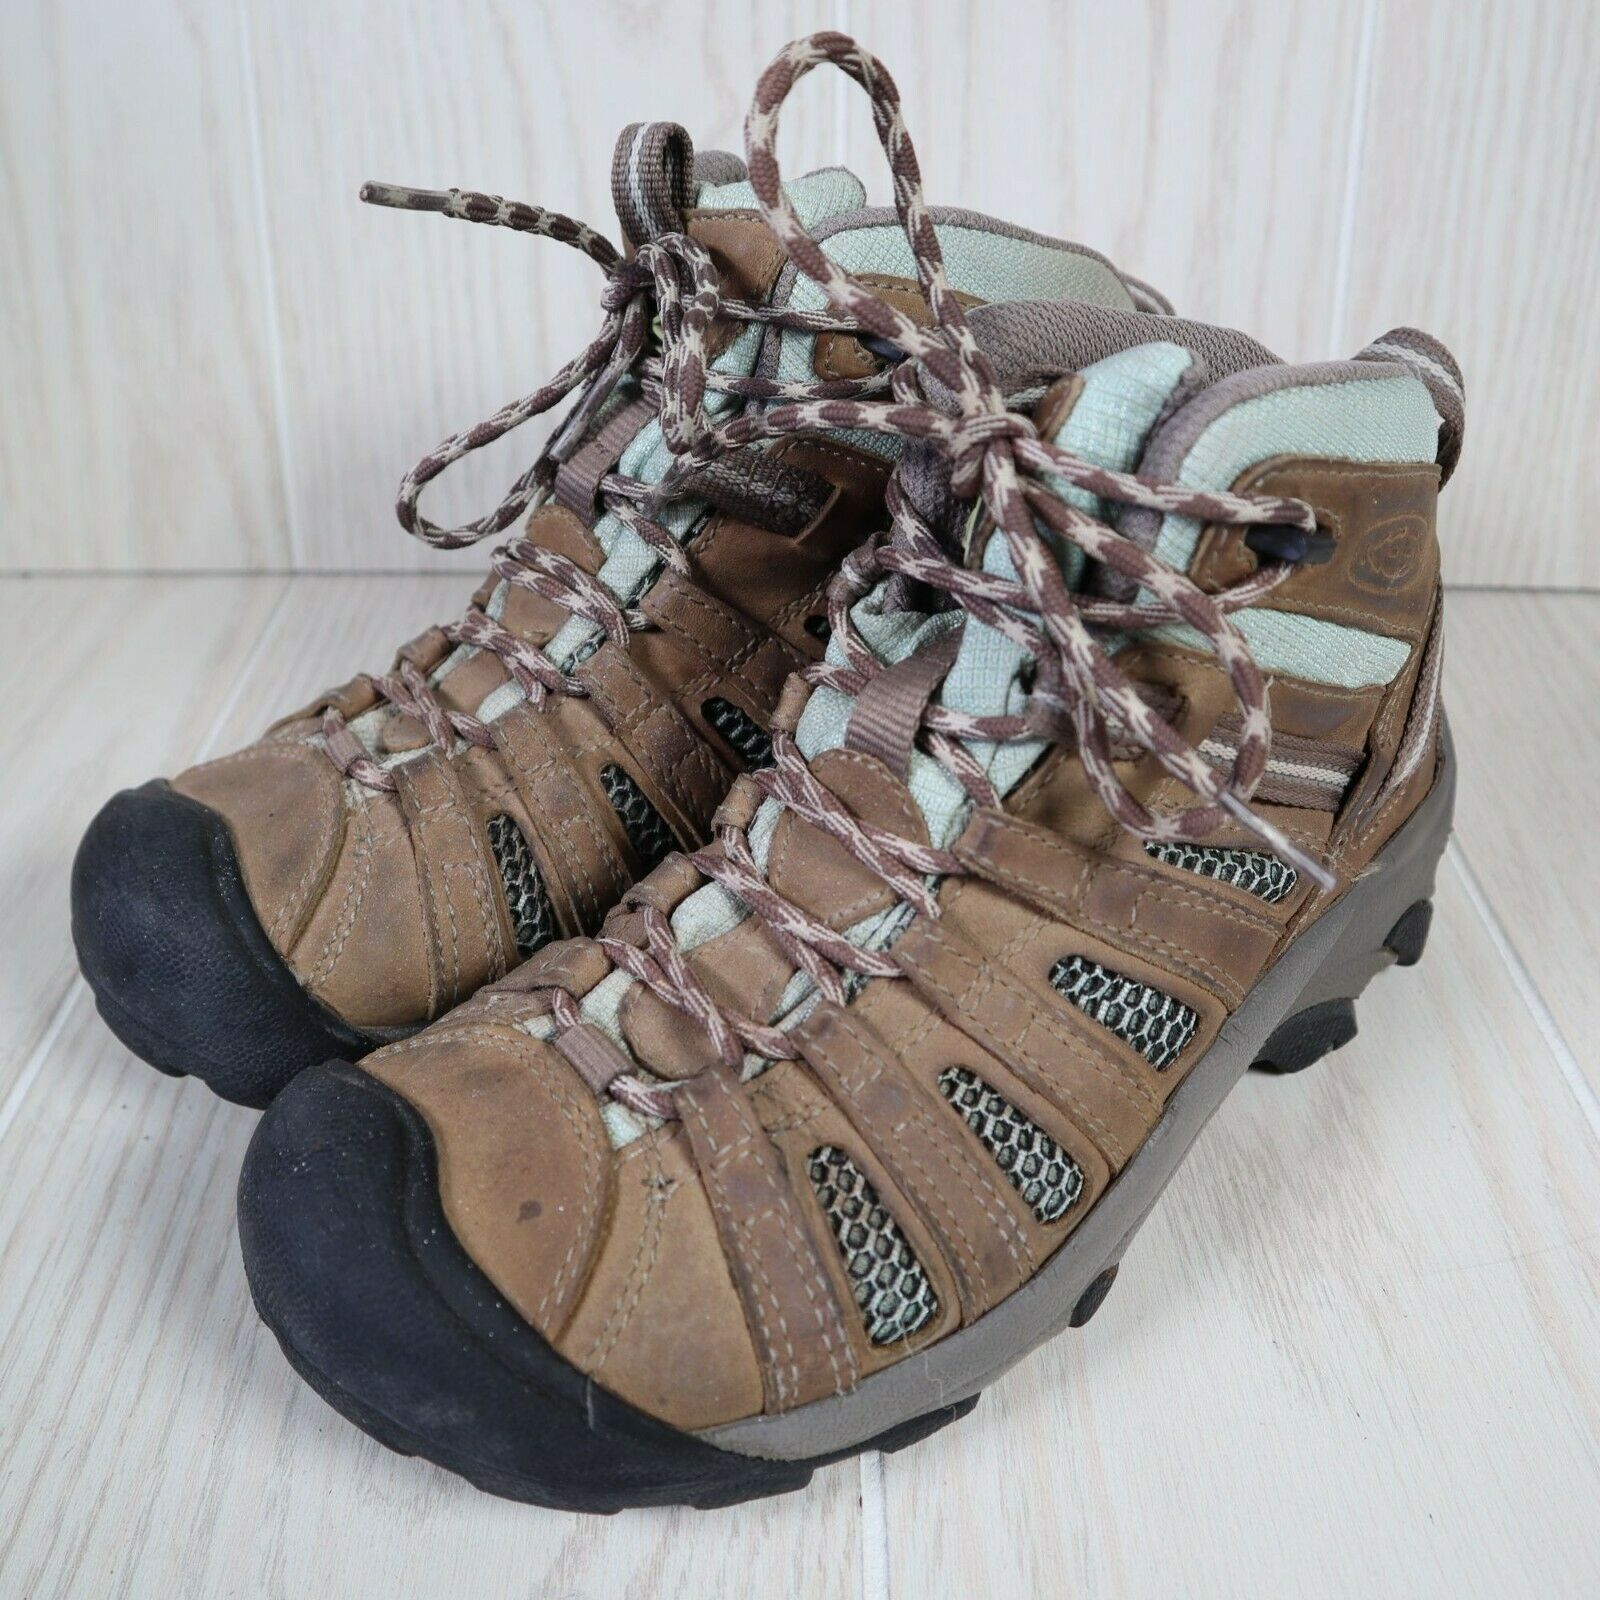 Keen Voyageur Mid Hiking Boots Brown Blue Shoes Women's Size 7 See Pics